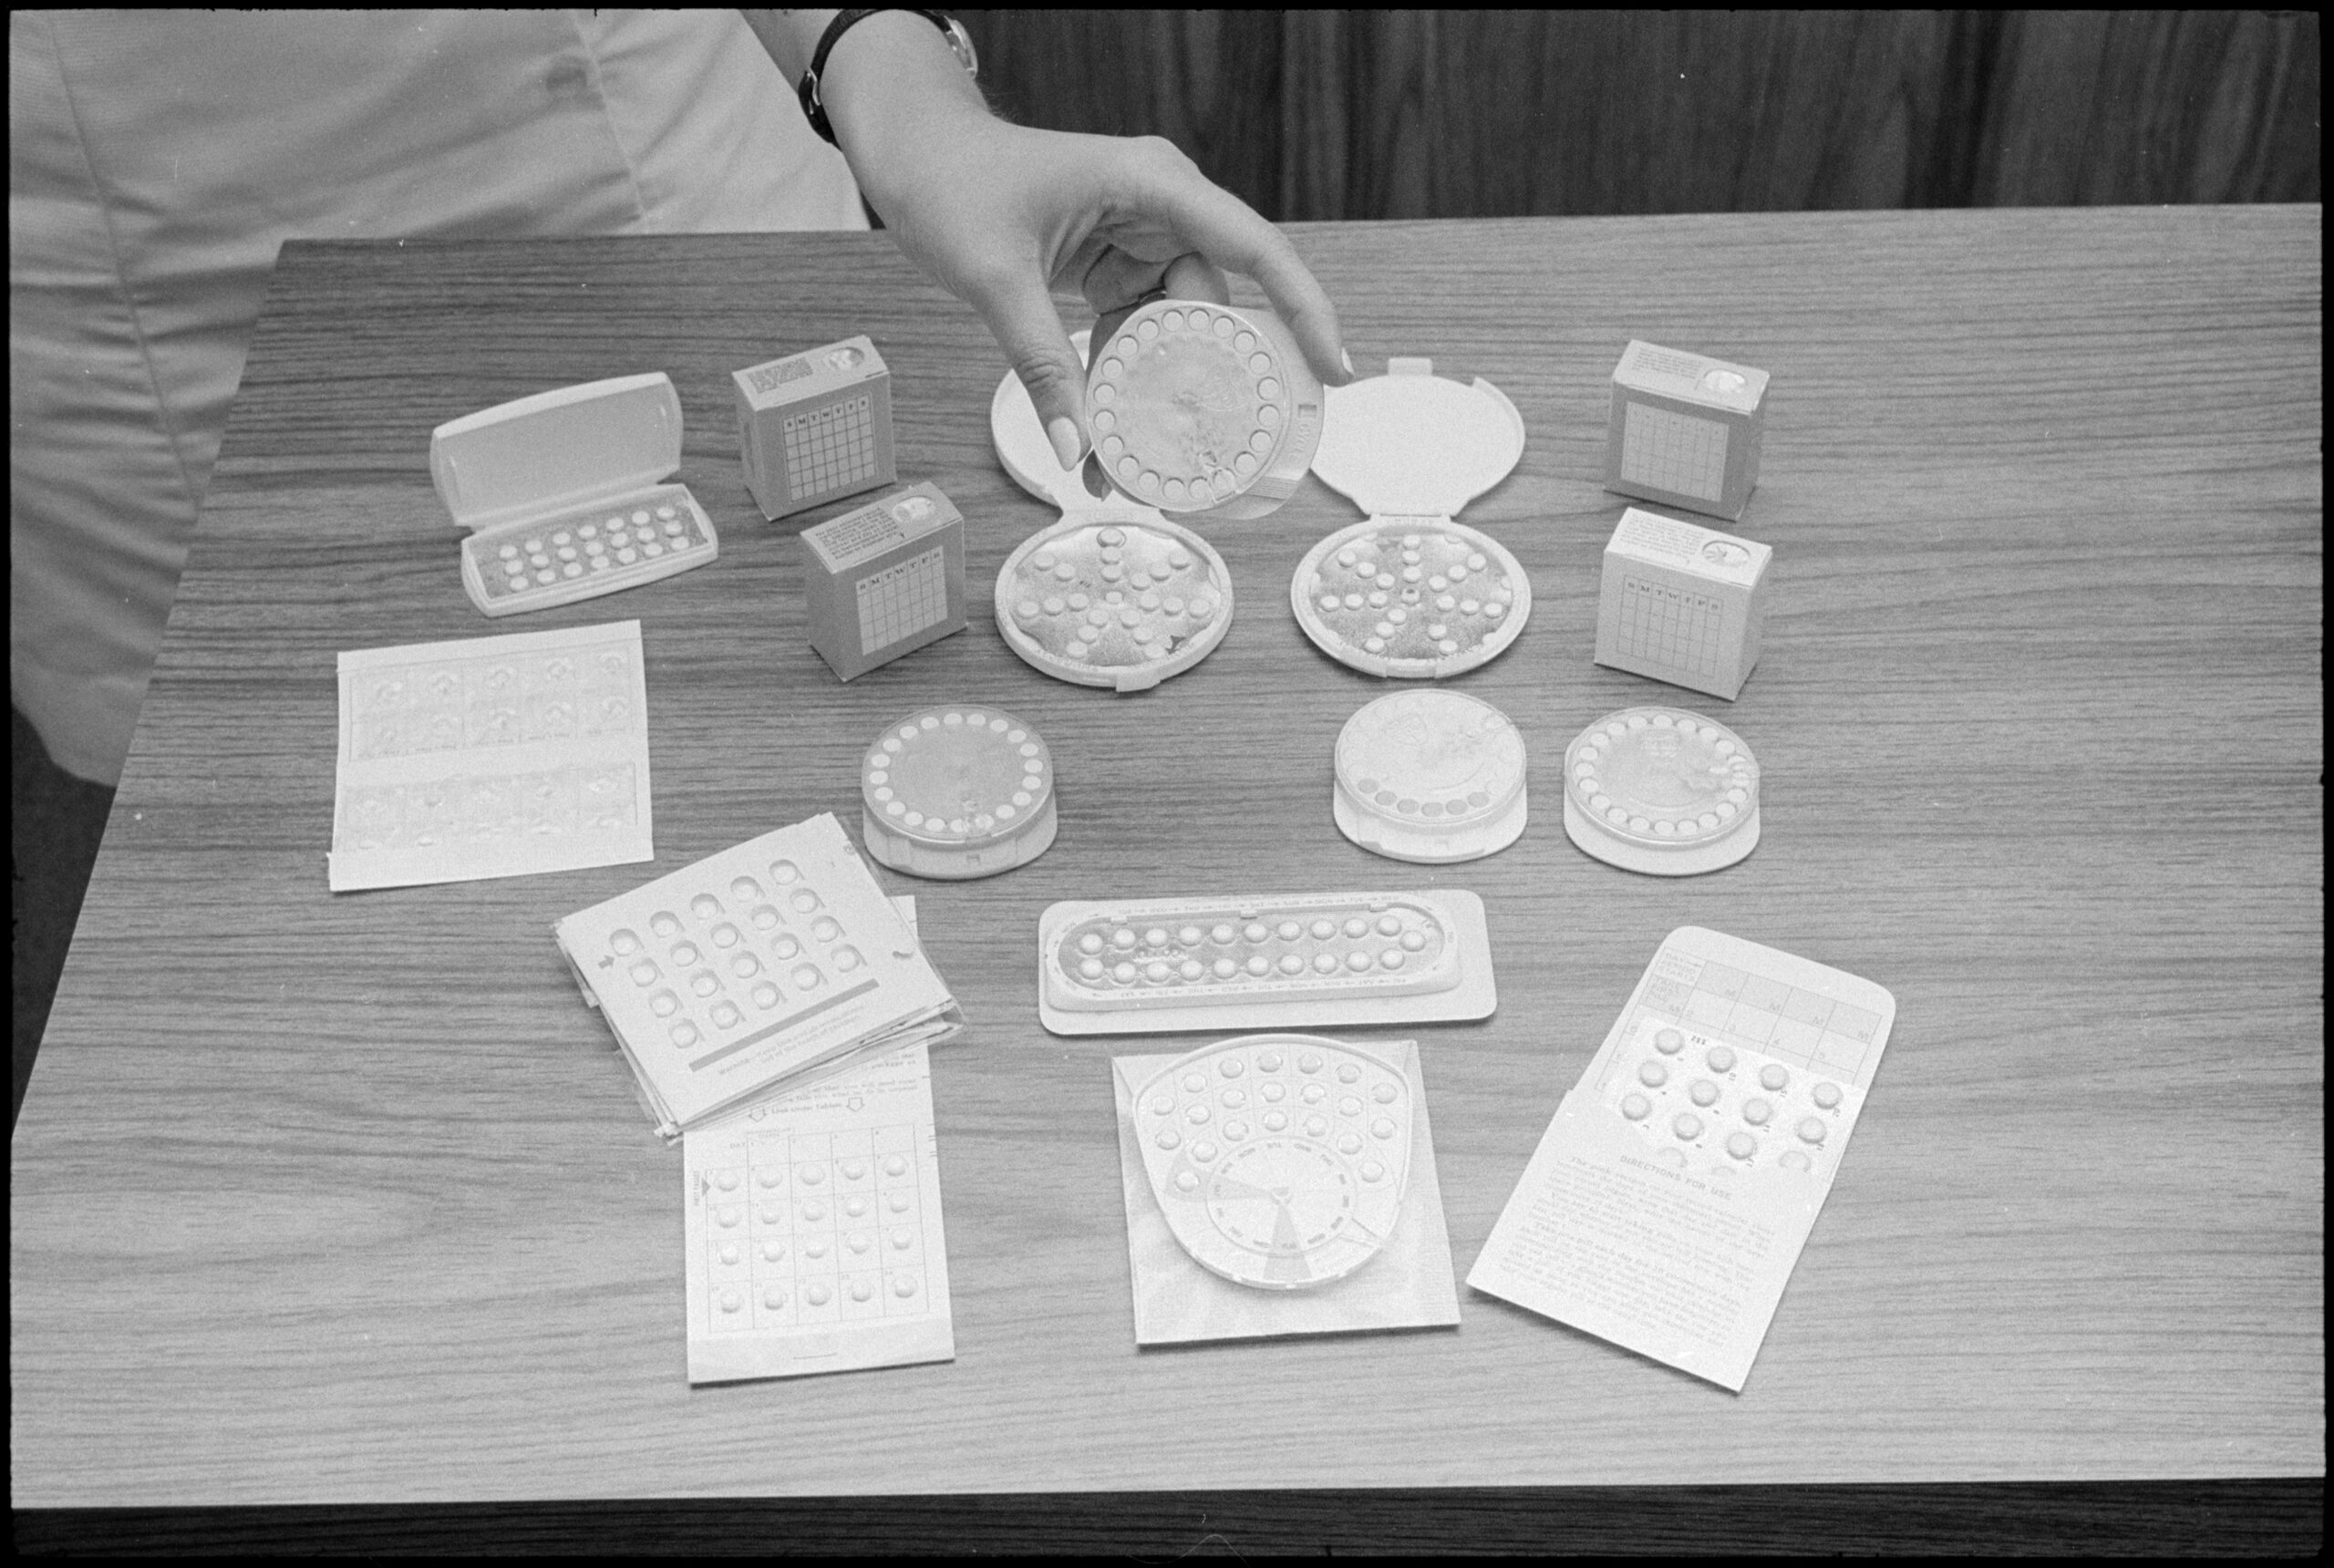 Display of various birth control pill packages, Washington DC, May 22, 1968. (Photo Credit: Marion S Trikosko/US News & World Report Magazine Photograph Collection/PhotoQuest/Getty Images)